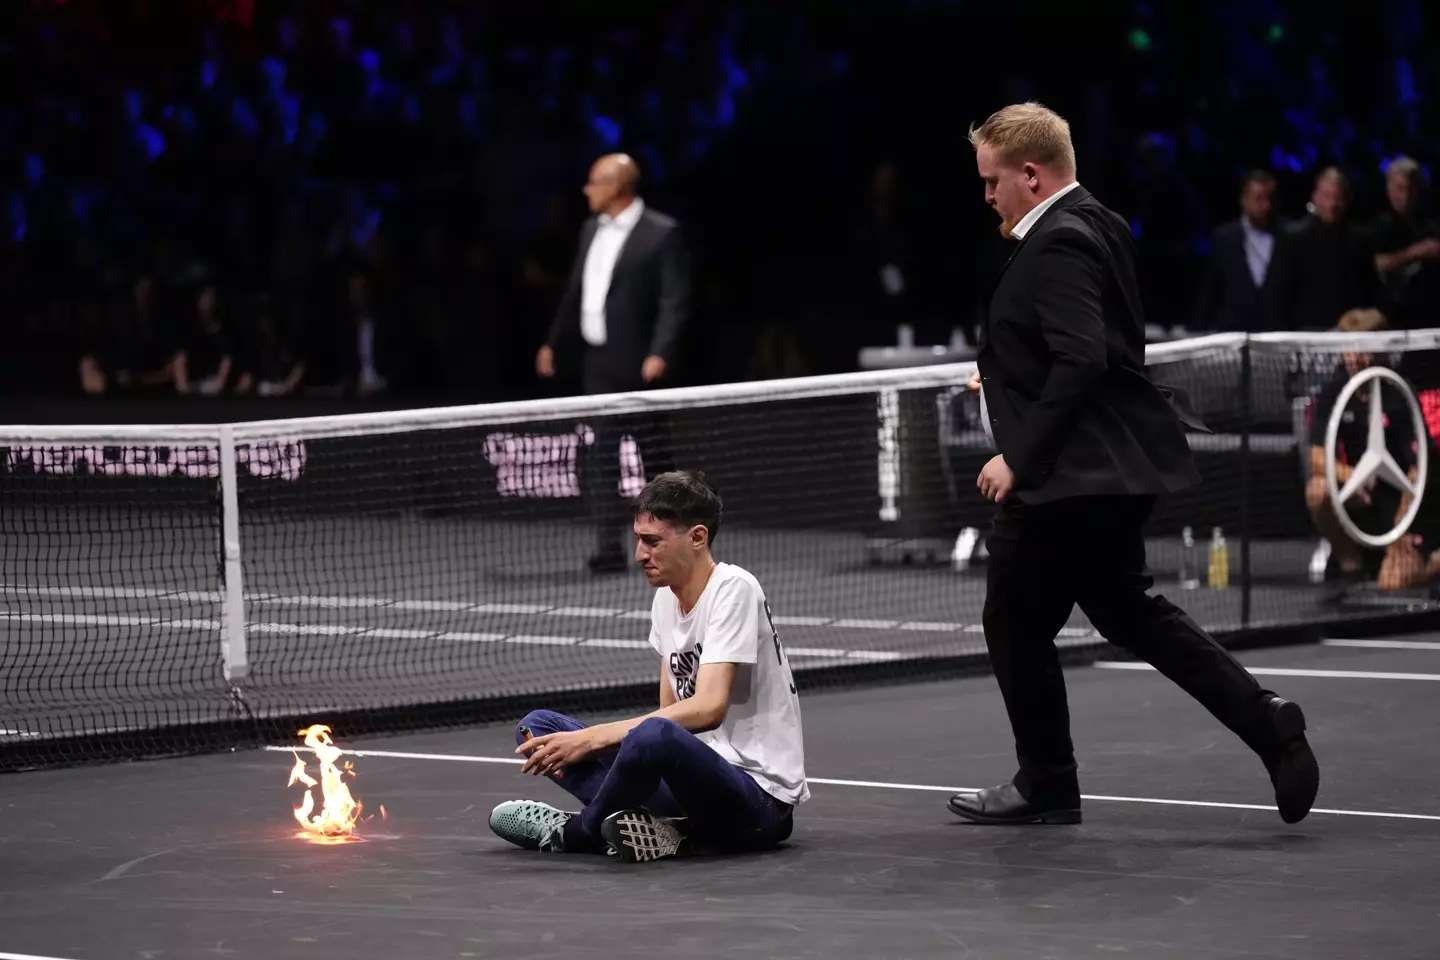 The protester set himself on fire ahead of Roger Federer's final match.